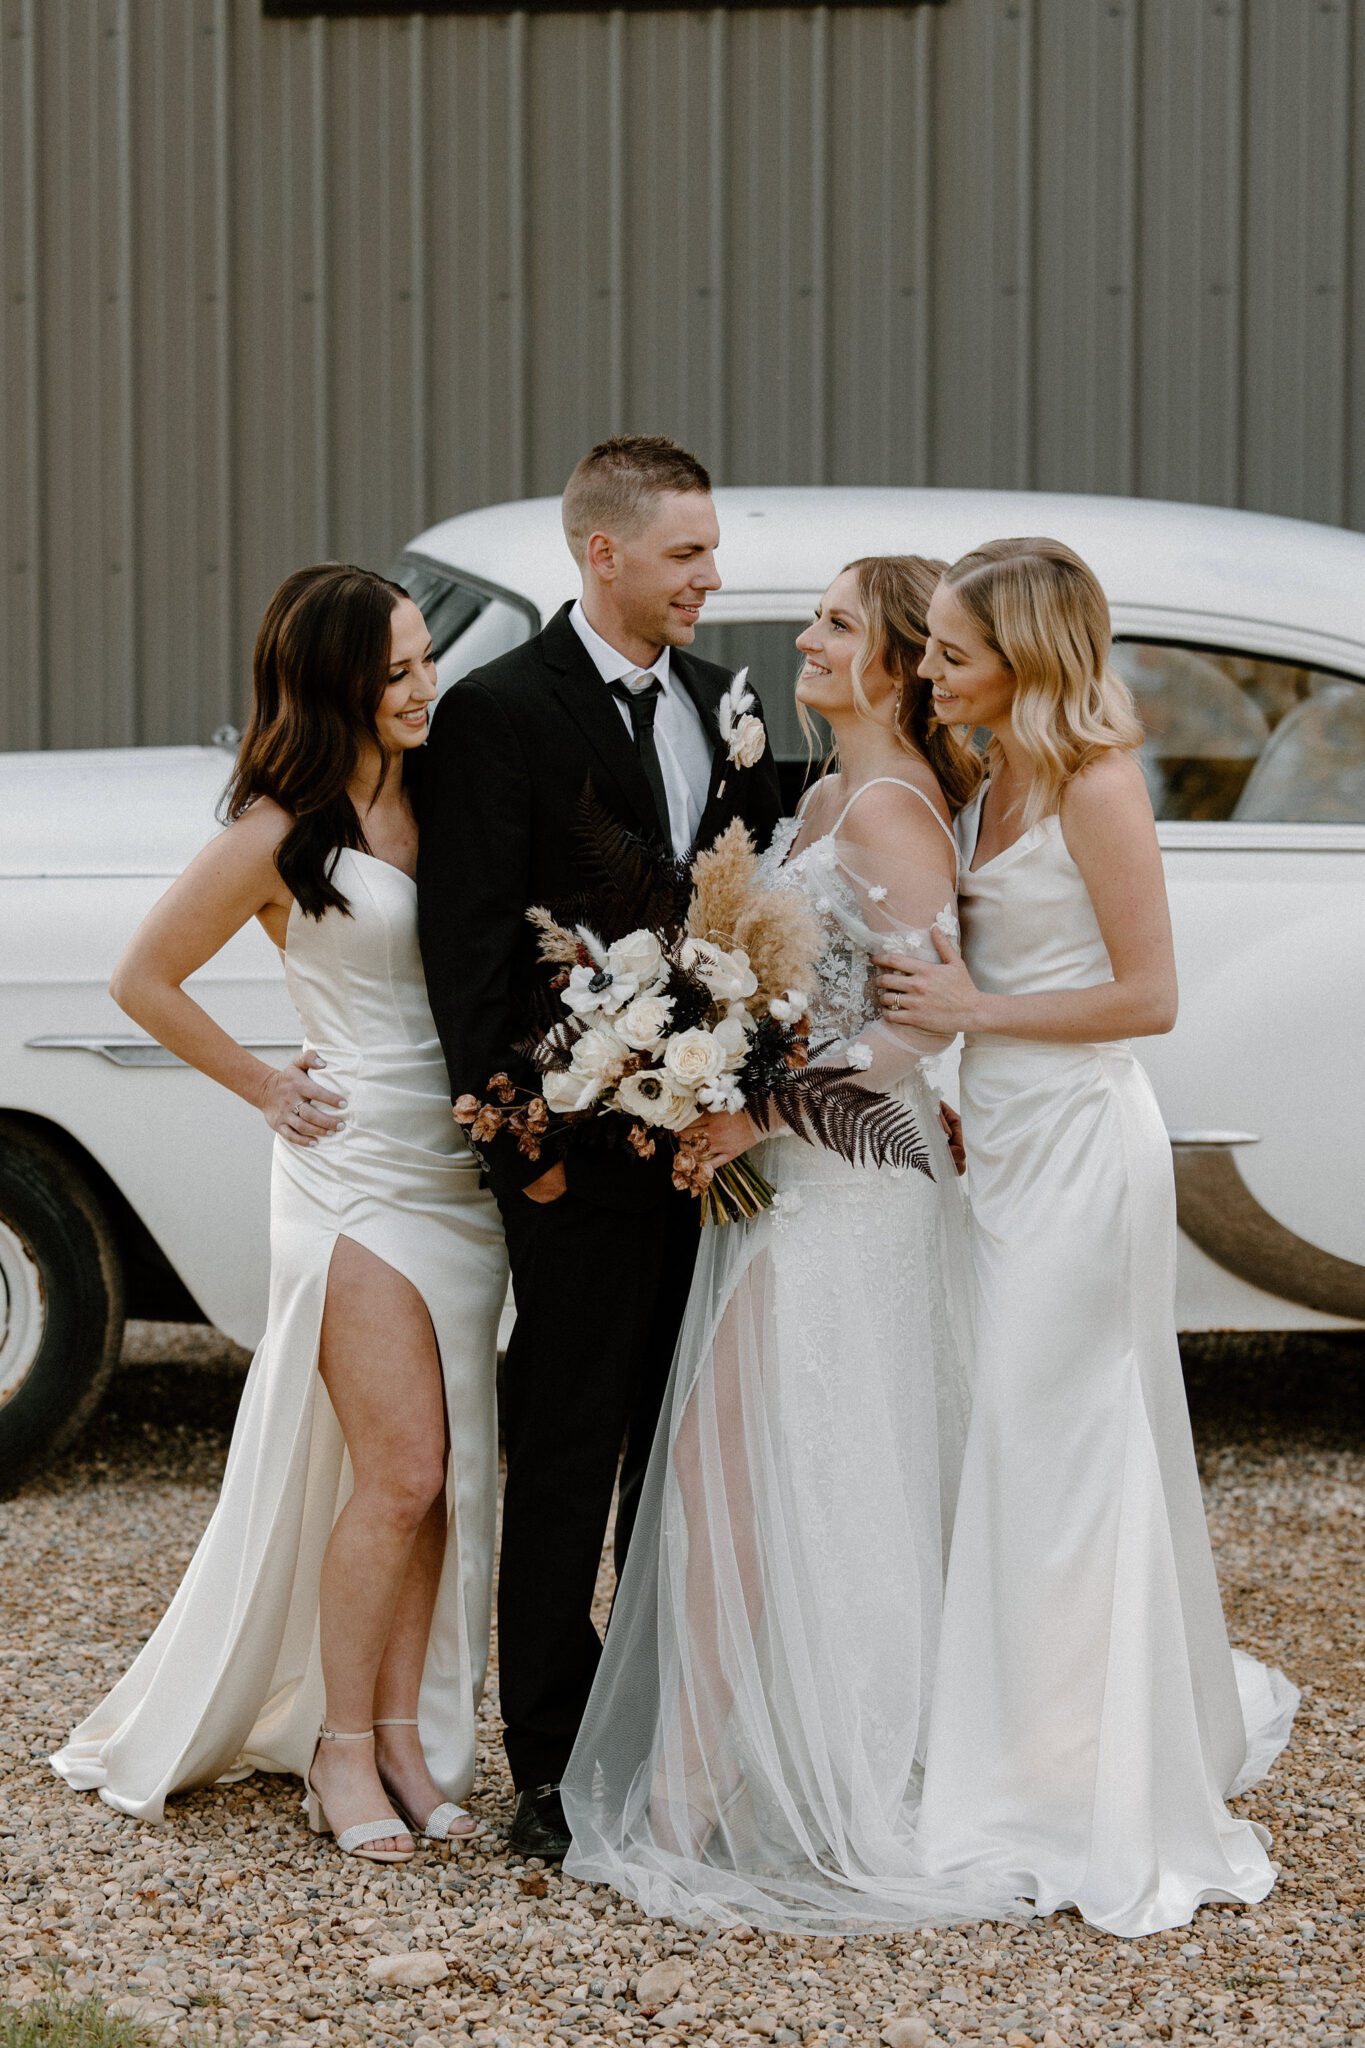 Portrait of bride and groom and bridesmaids, standing in front of cream-coloured vintage getaway car, warm and moody wedding inspiration at 52 North Venue. 